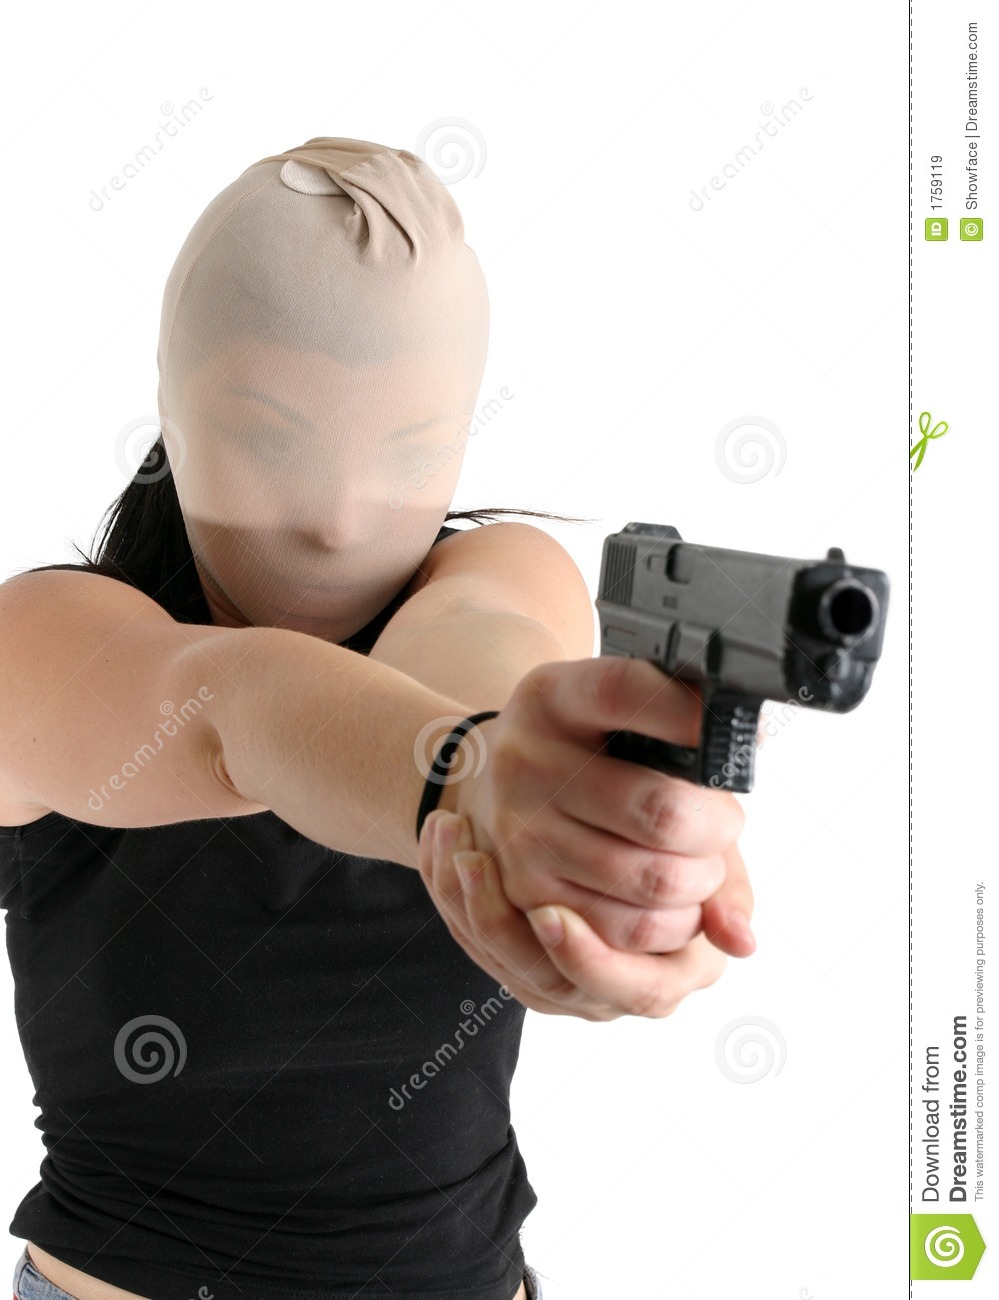 Female Robber With Gun Royalty Free Stock Images   Image  1759119